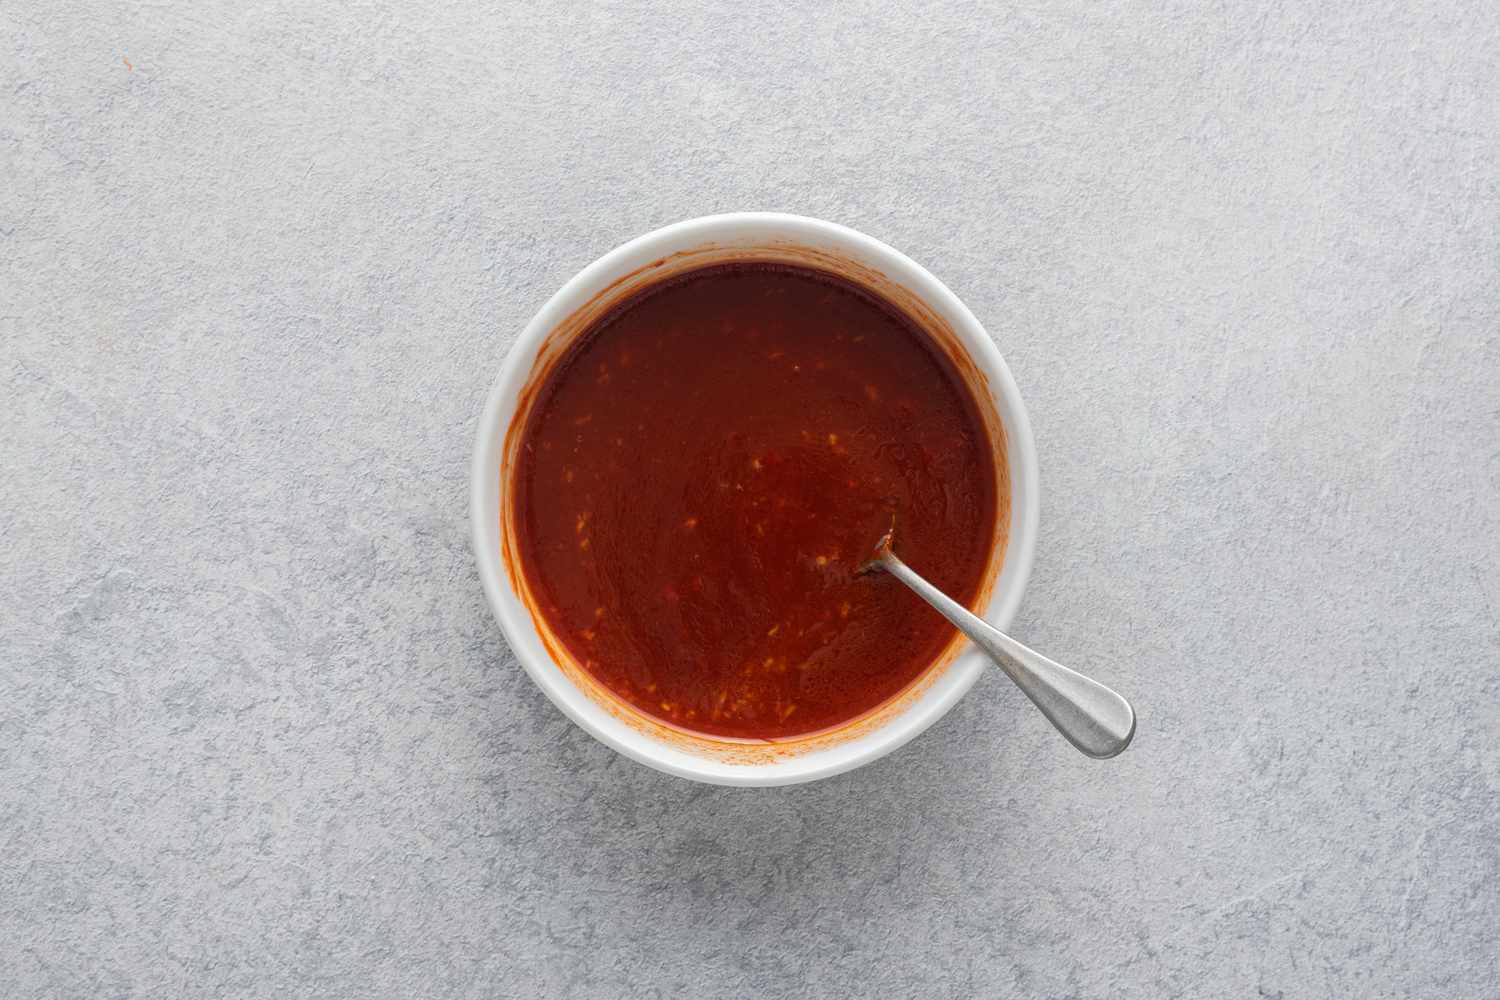 Ingredients stirred together with a spoon in a small bowl